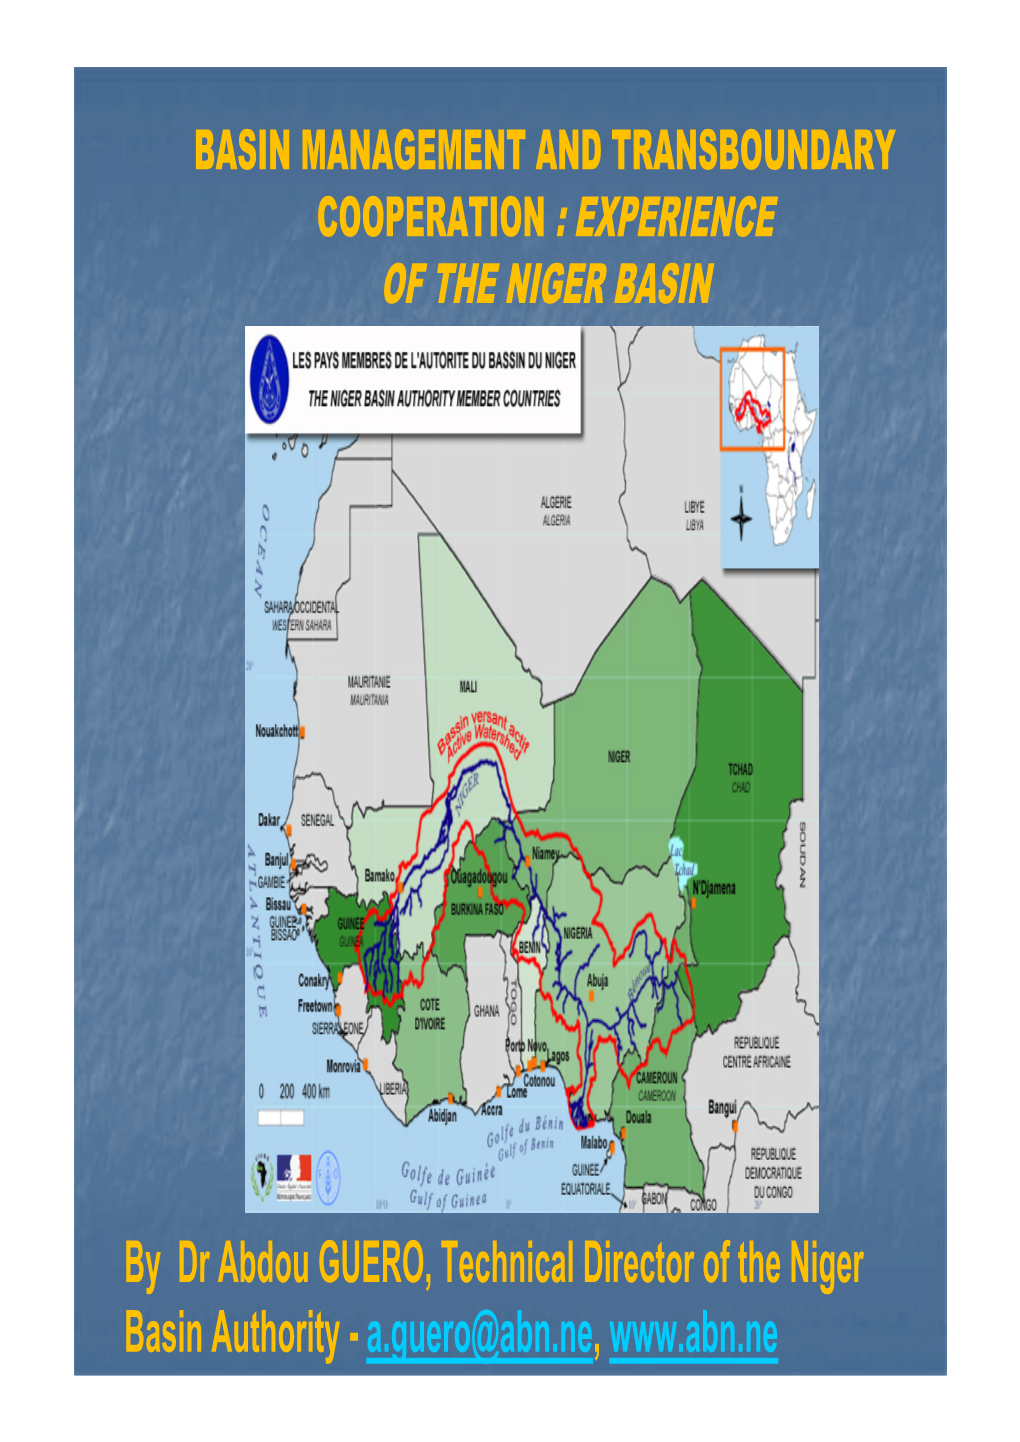 OF the NIGER BASIN by Dr Abdou GUERO, Technical Director of The